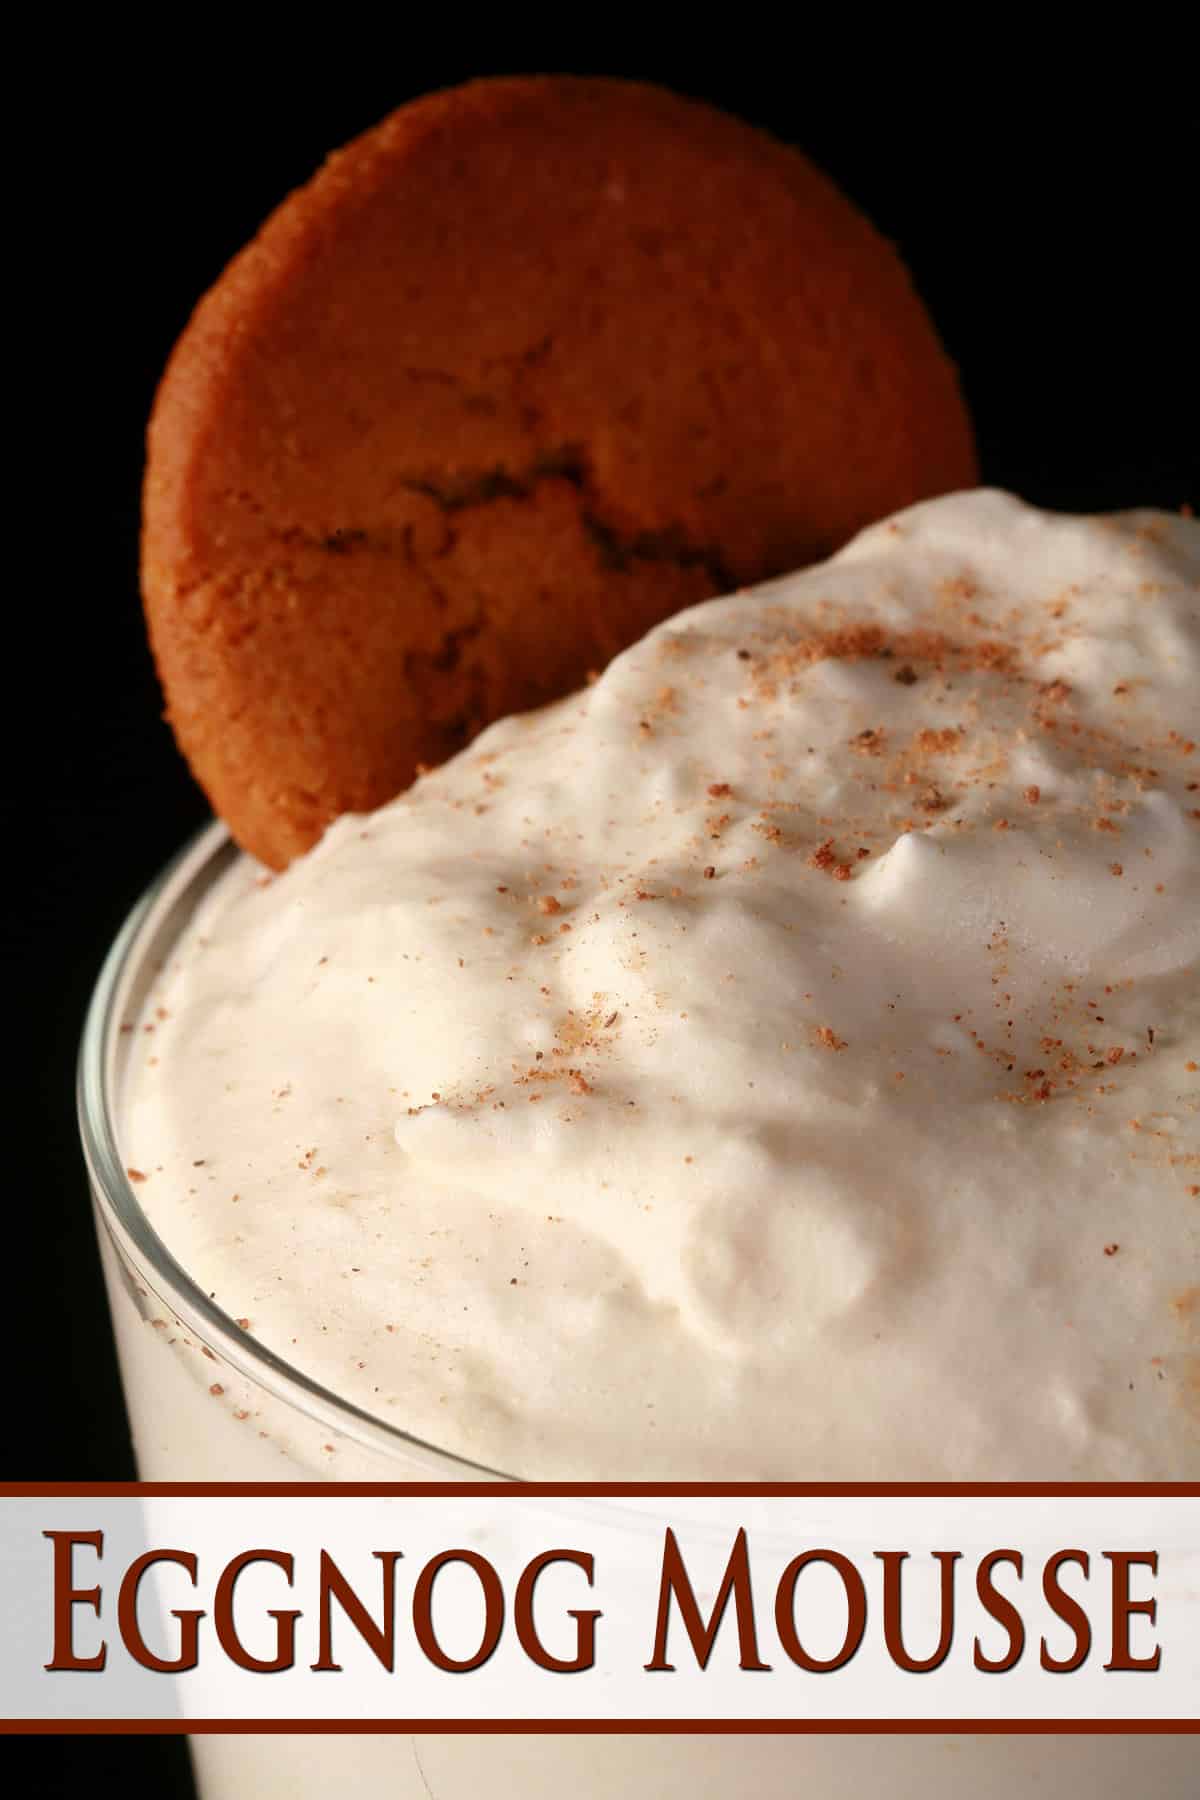 A close up photo of a glass eggnog mousse, with nutmeg and gingersnap cookie garnish.